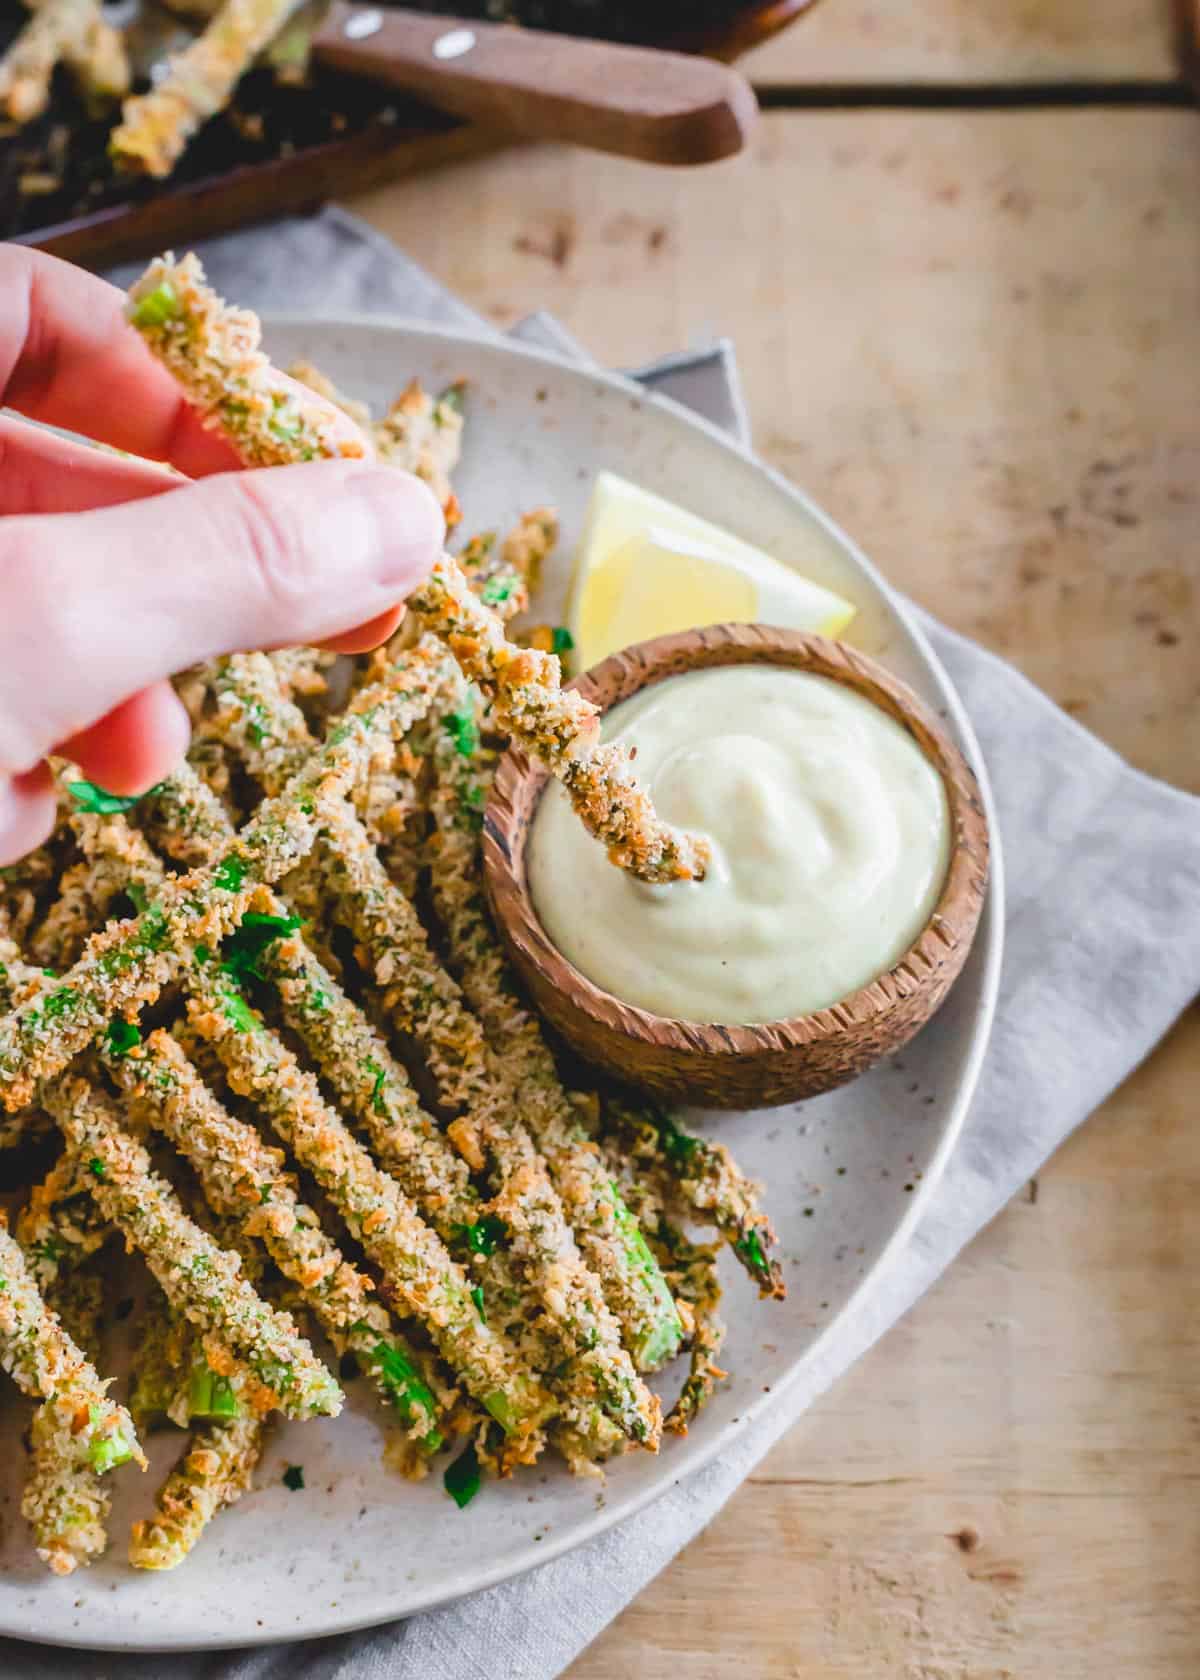 Gluten-free and vegan asparagus fries made in the oven or air fryer being dipped into lemon dijon sauce.